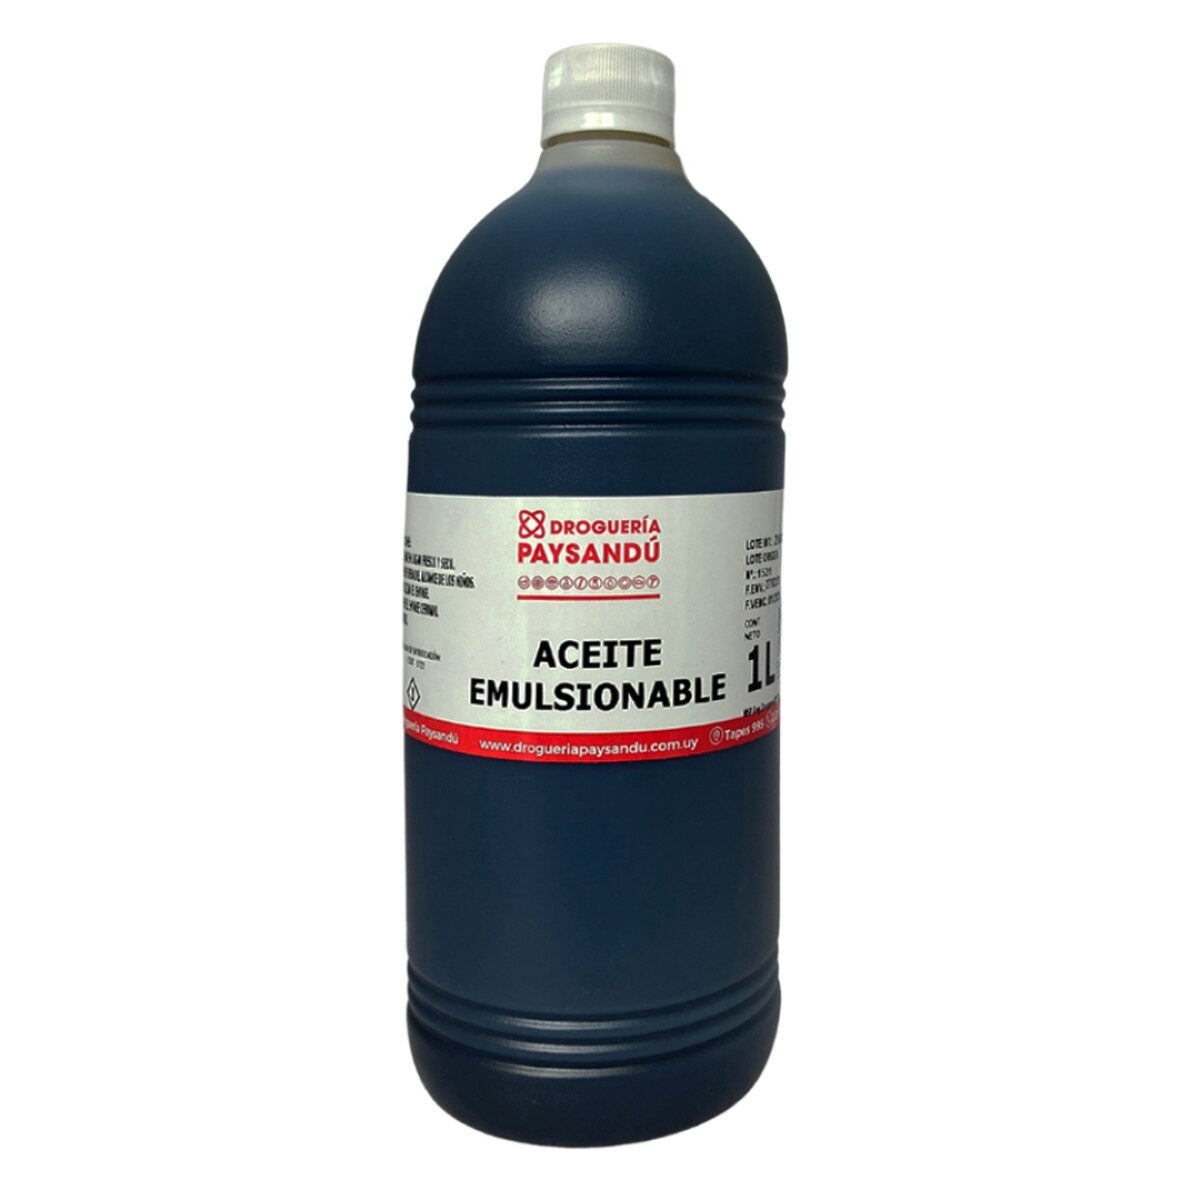 Aceite emulsionable 